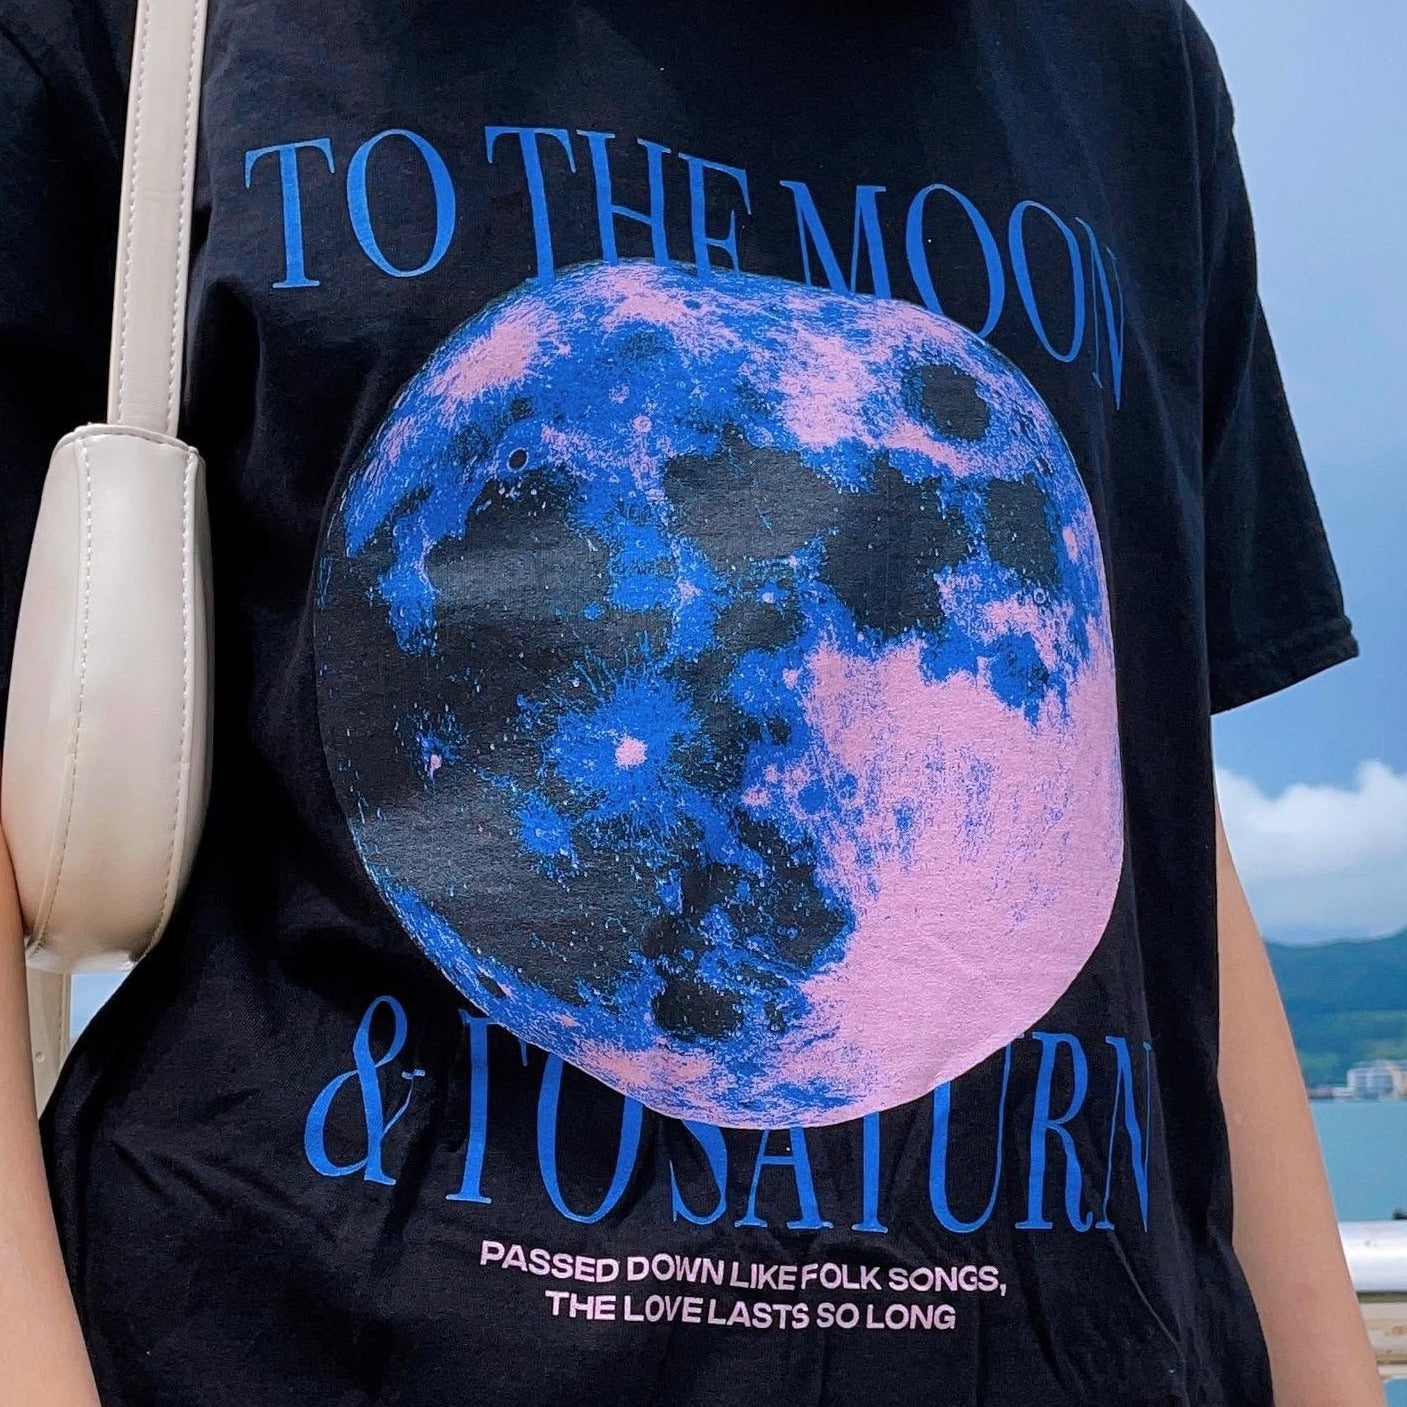 Love You to the Moon and to Saturn Tshirt, Taylor Swift Concert Tee, Seven  Taylor Shirt, Swifty Merch, Swiftie Gifts, Swifty Shirt, Folklore 